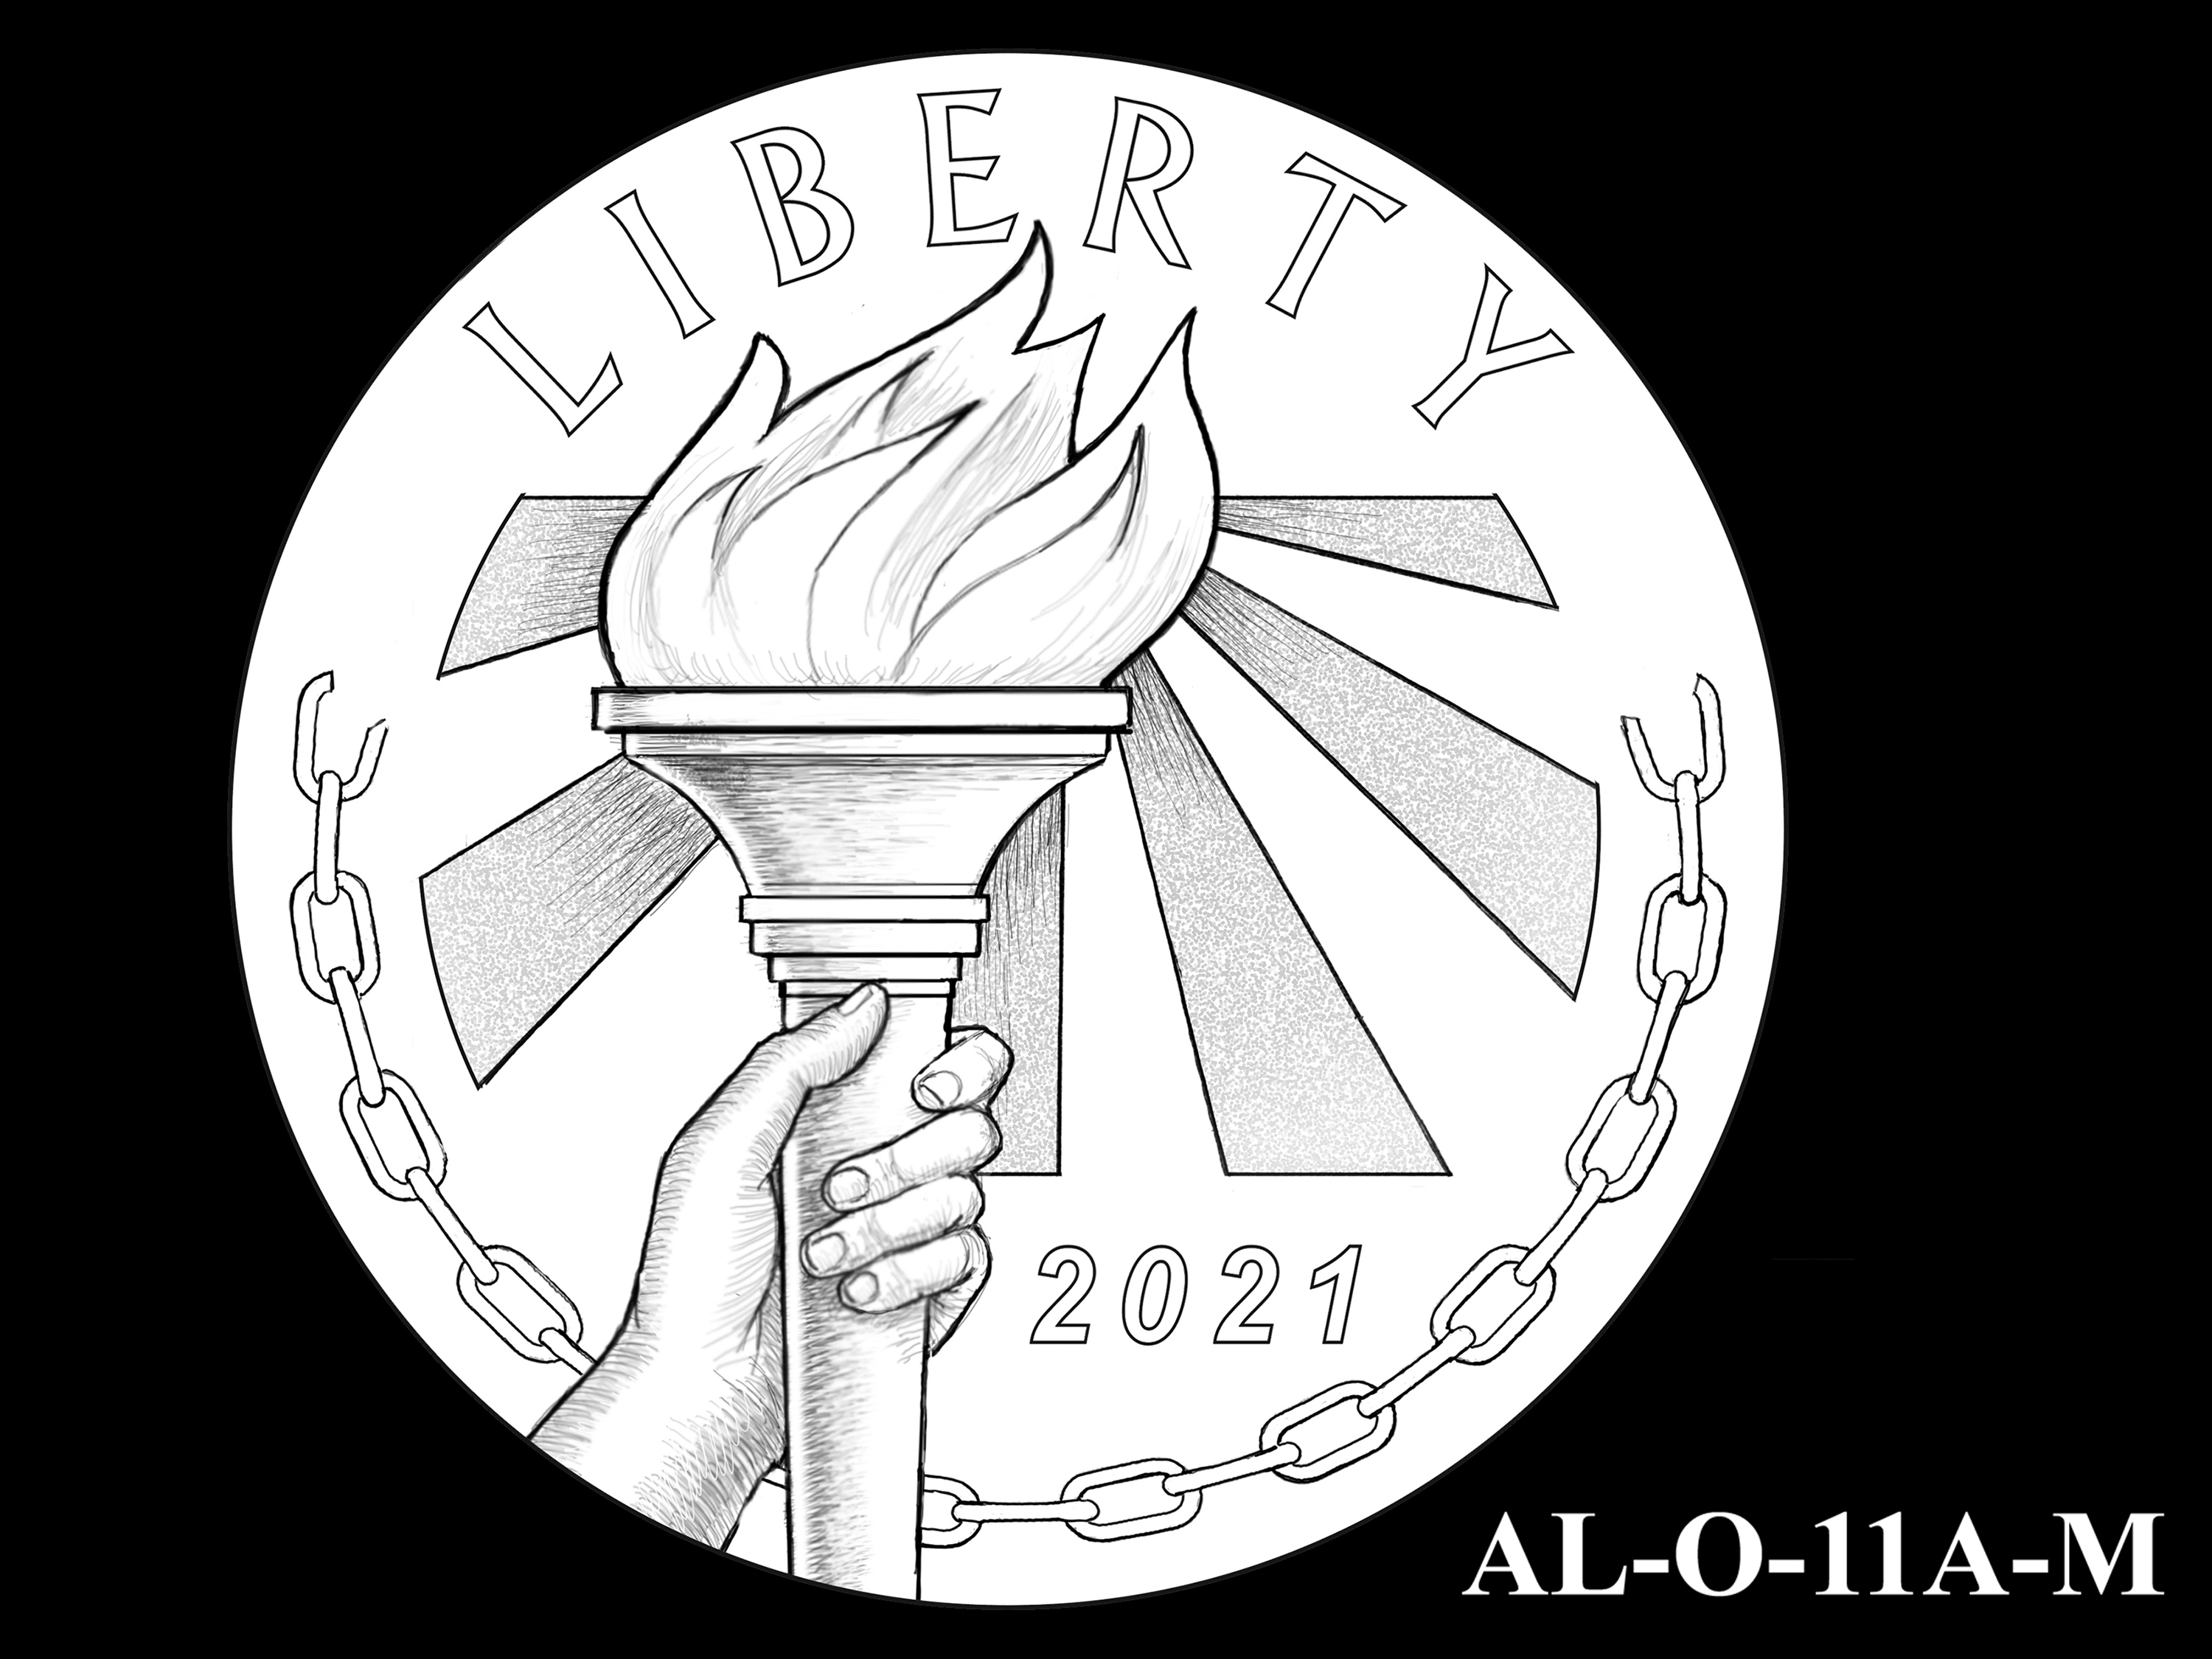 AL-O-11A-M -- 2021 American Liberty Gold Coin and Silver Medal Program - Obverse